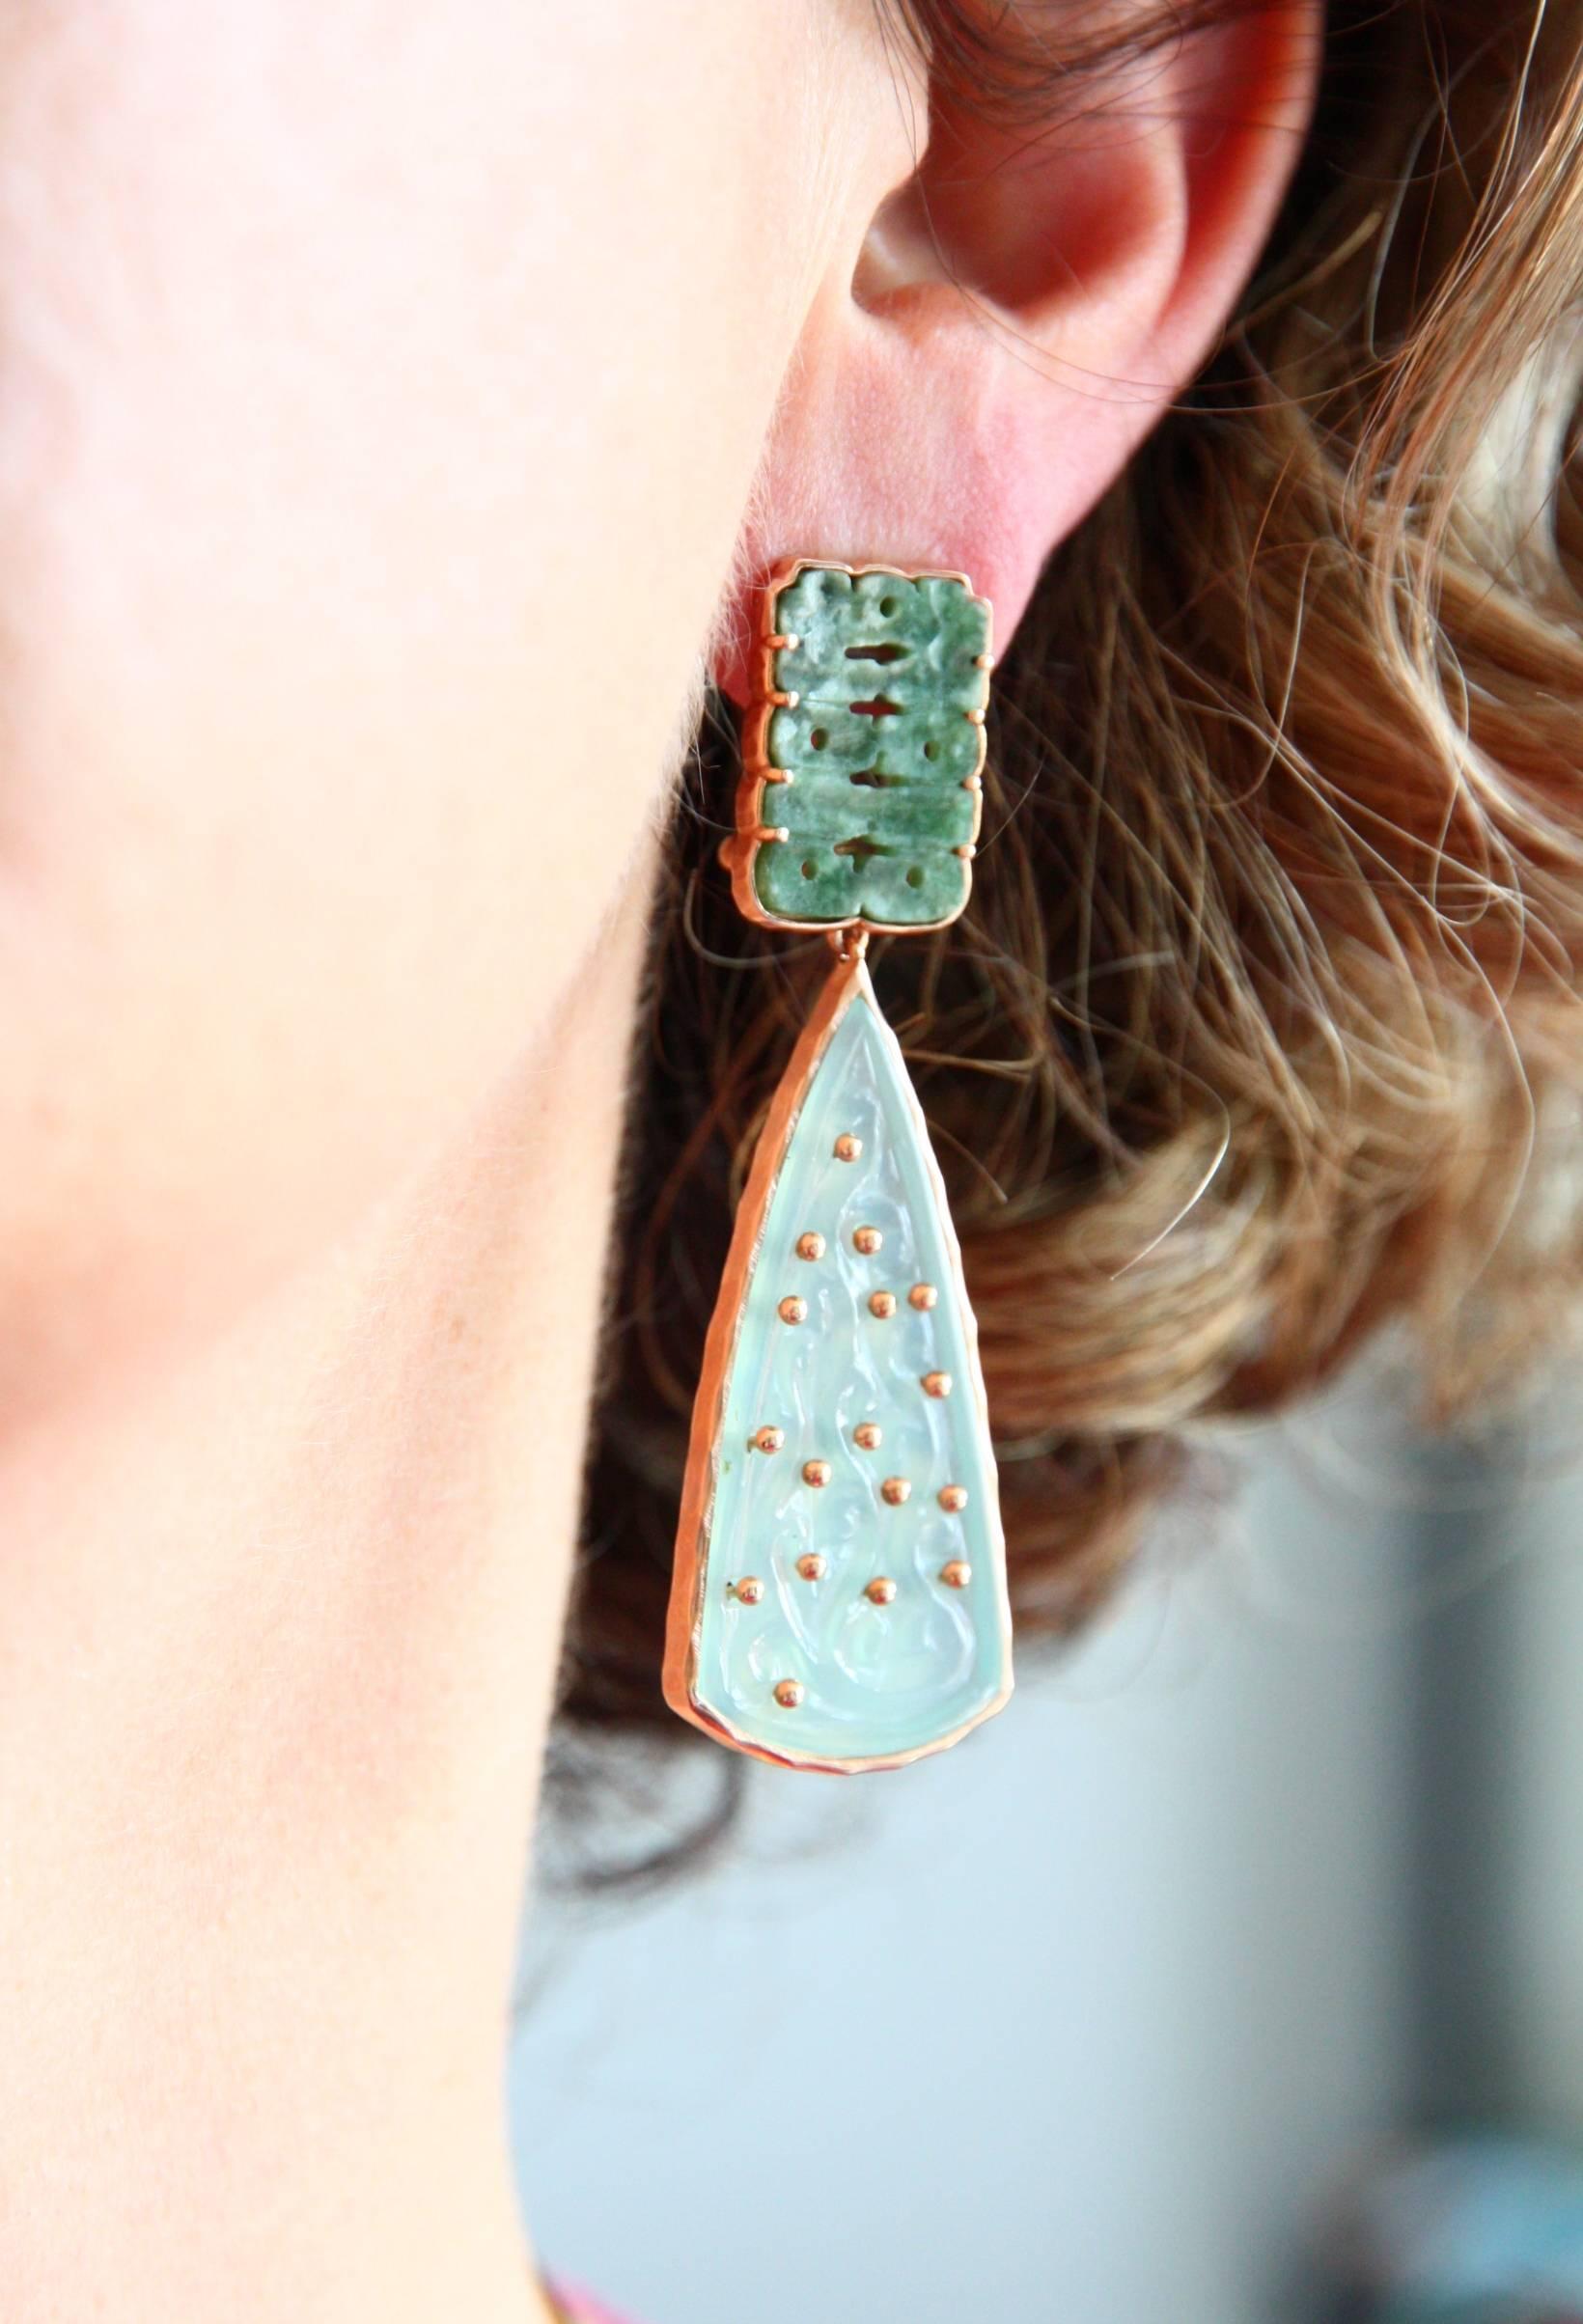 Earrings with blu carved opal drops, antiques Chinese carved jade, 18kt gold gr. 18,80 on the back  side decorated with cherry trees flowers. Total length 6 cm.
All Giulia Colussi jewelry is new and has never been previously owned or worn. Each item